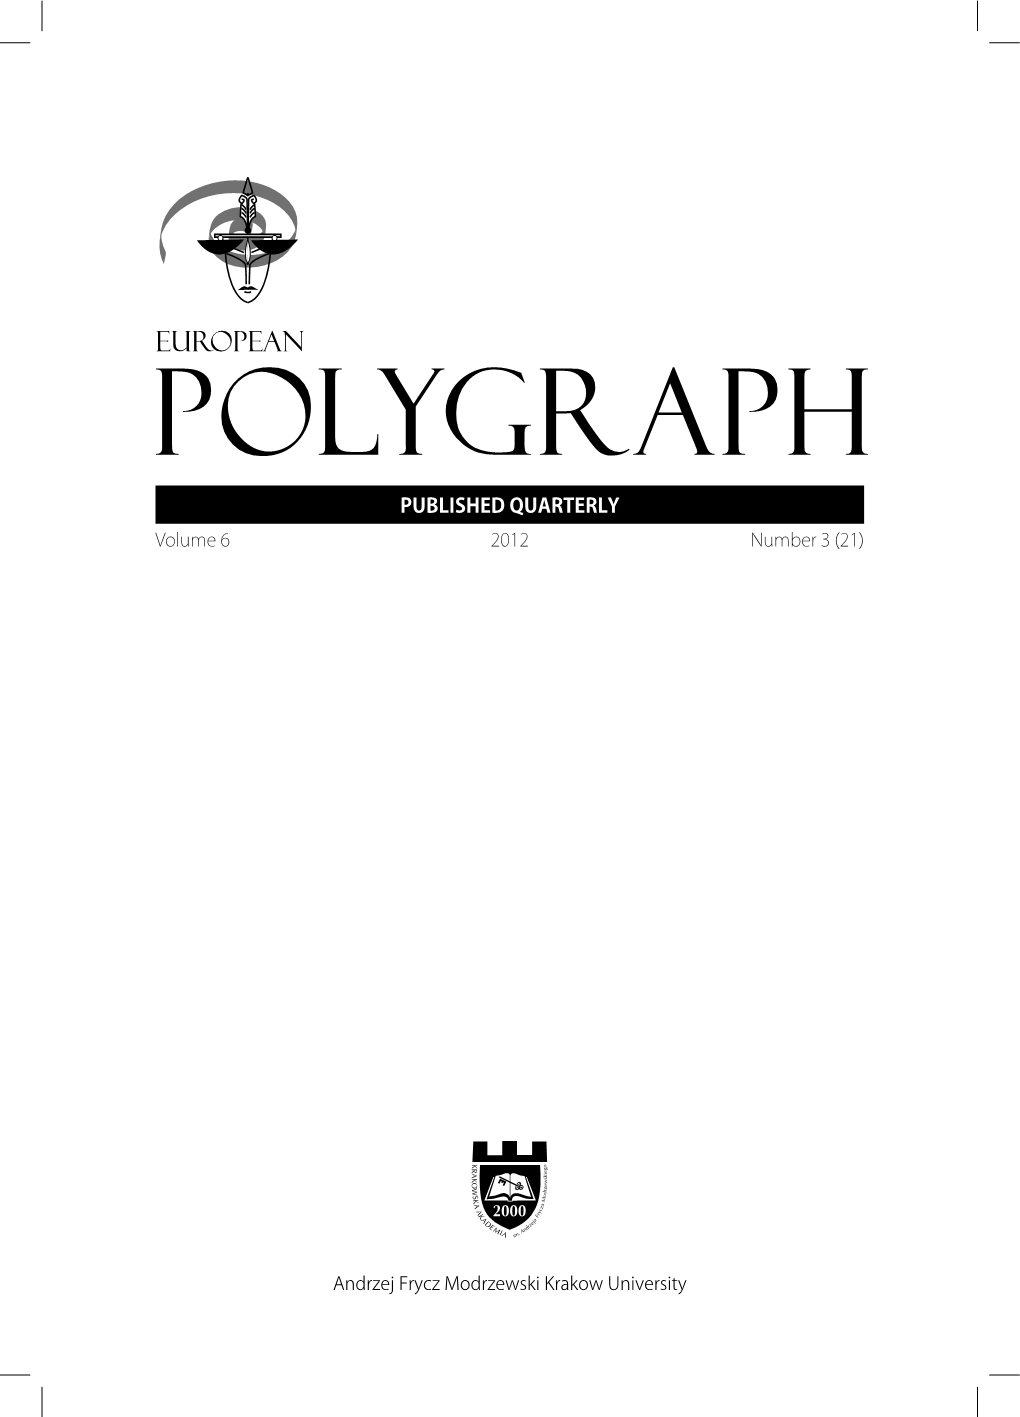 Conditions and Requirements of Polygraph Examination